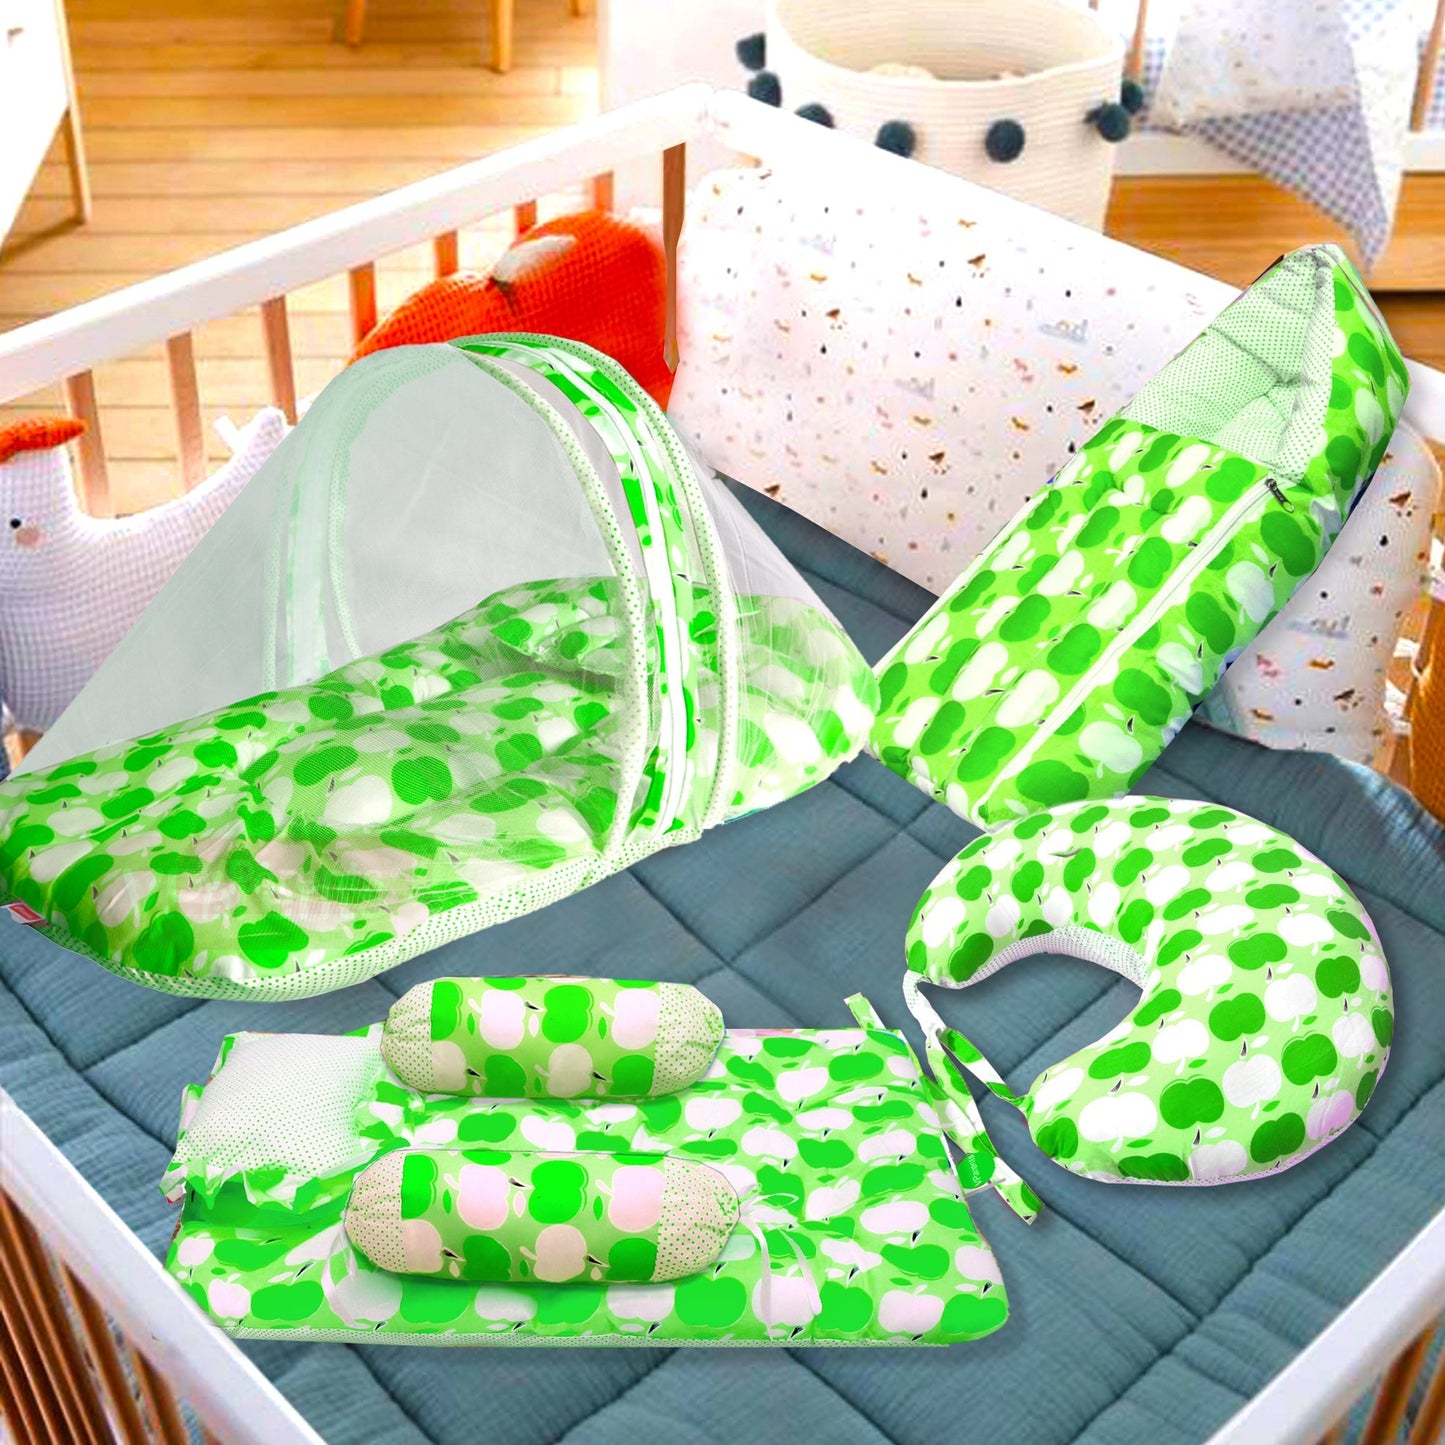 VParents Cheeky Cheeky  Baby 4 Piece Bedding Set with Pillow and Bolsters Sleeping Bag and Bedding Set and Feeding Pillow Combo